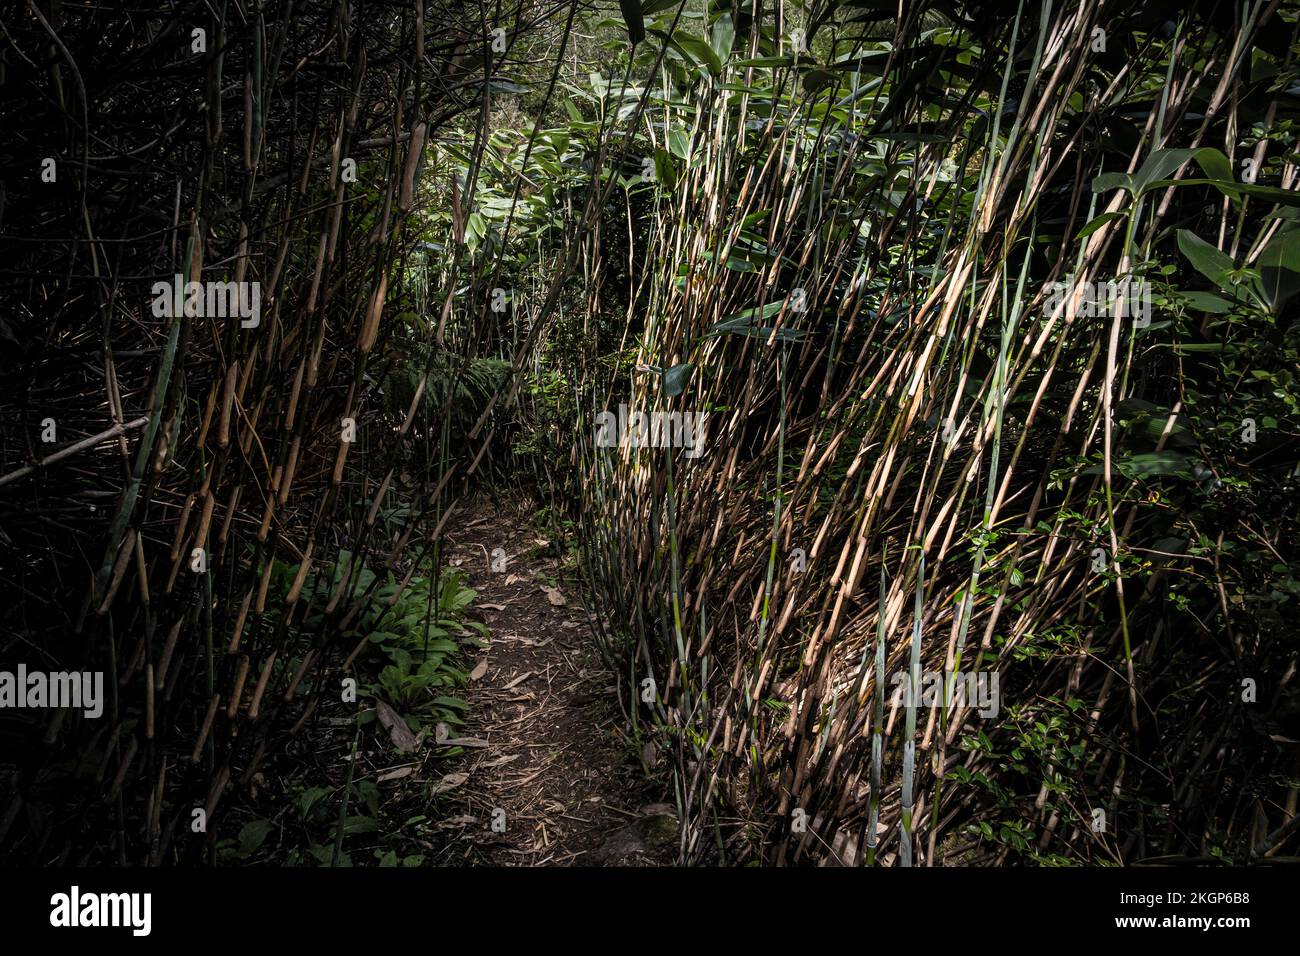 A footpath through a stand of Bamboo in the wild sub-tropical Penjjick Garden in Cornwall.  Penjerrick Garden is recognised as Cornwalls true jungle g Stock Photo